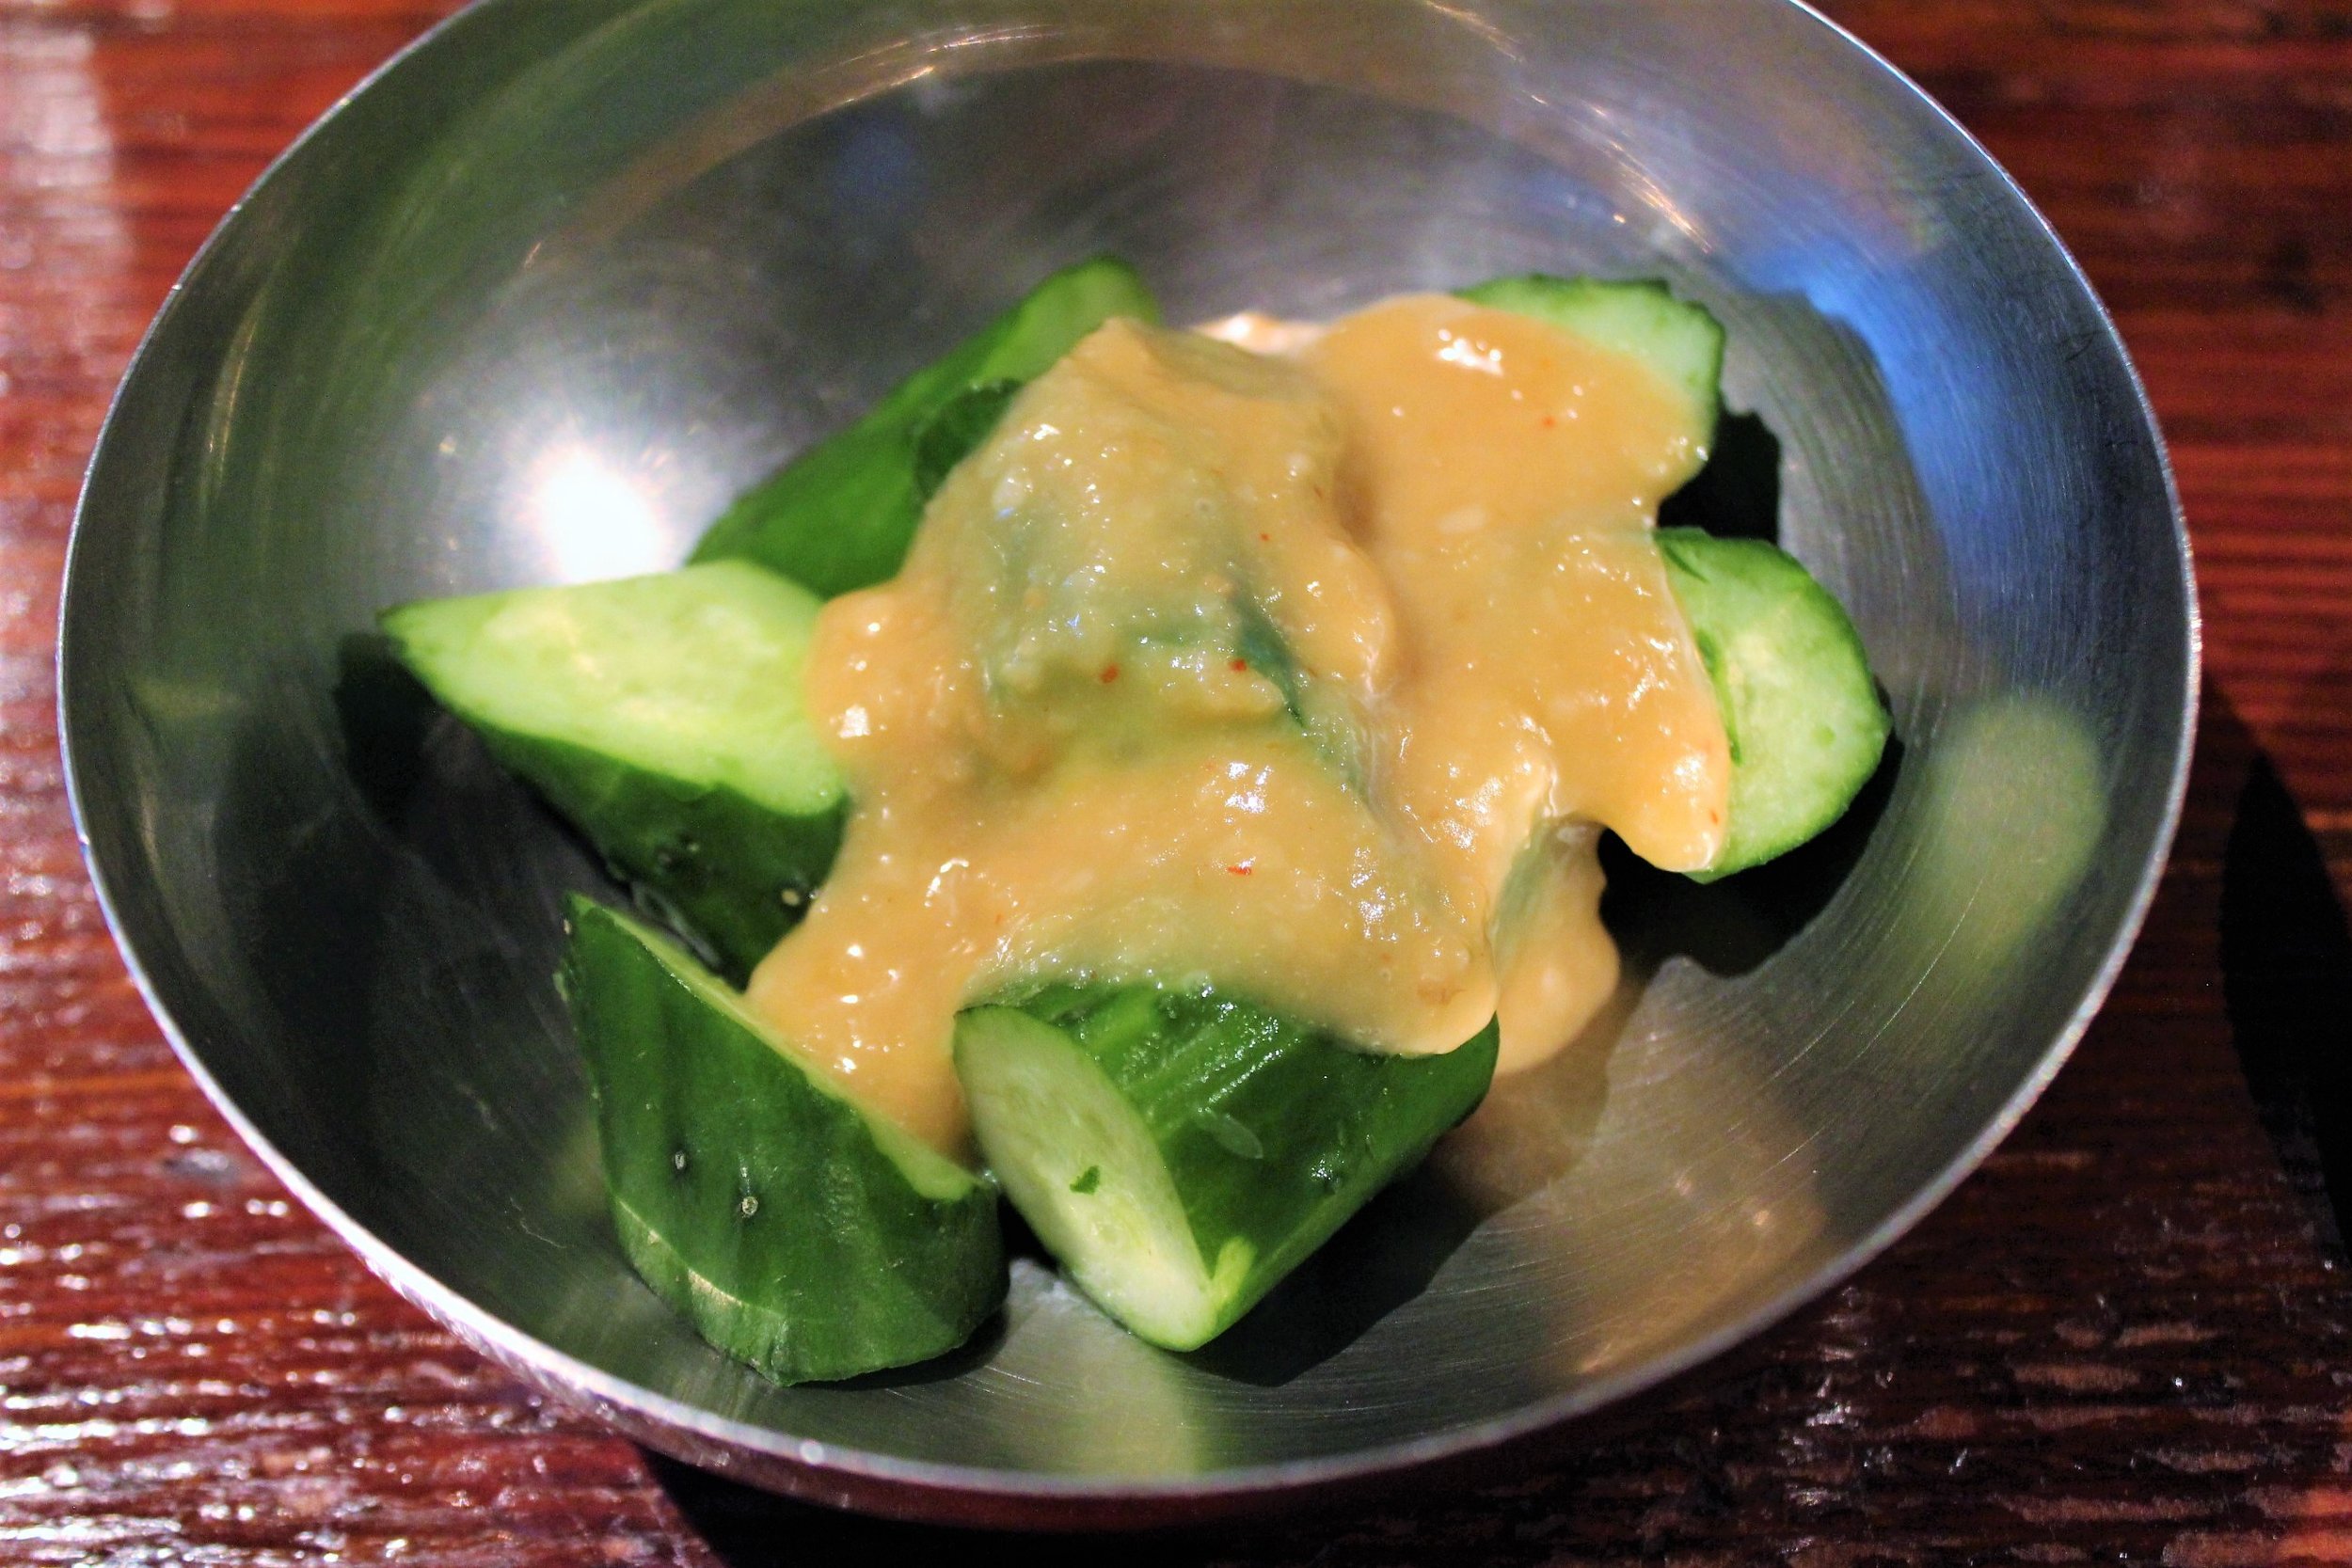 Cucumber with Special Miso Sauce